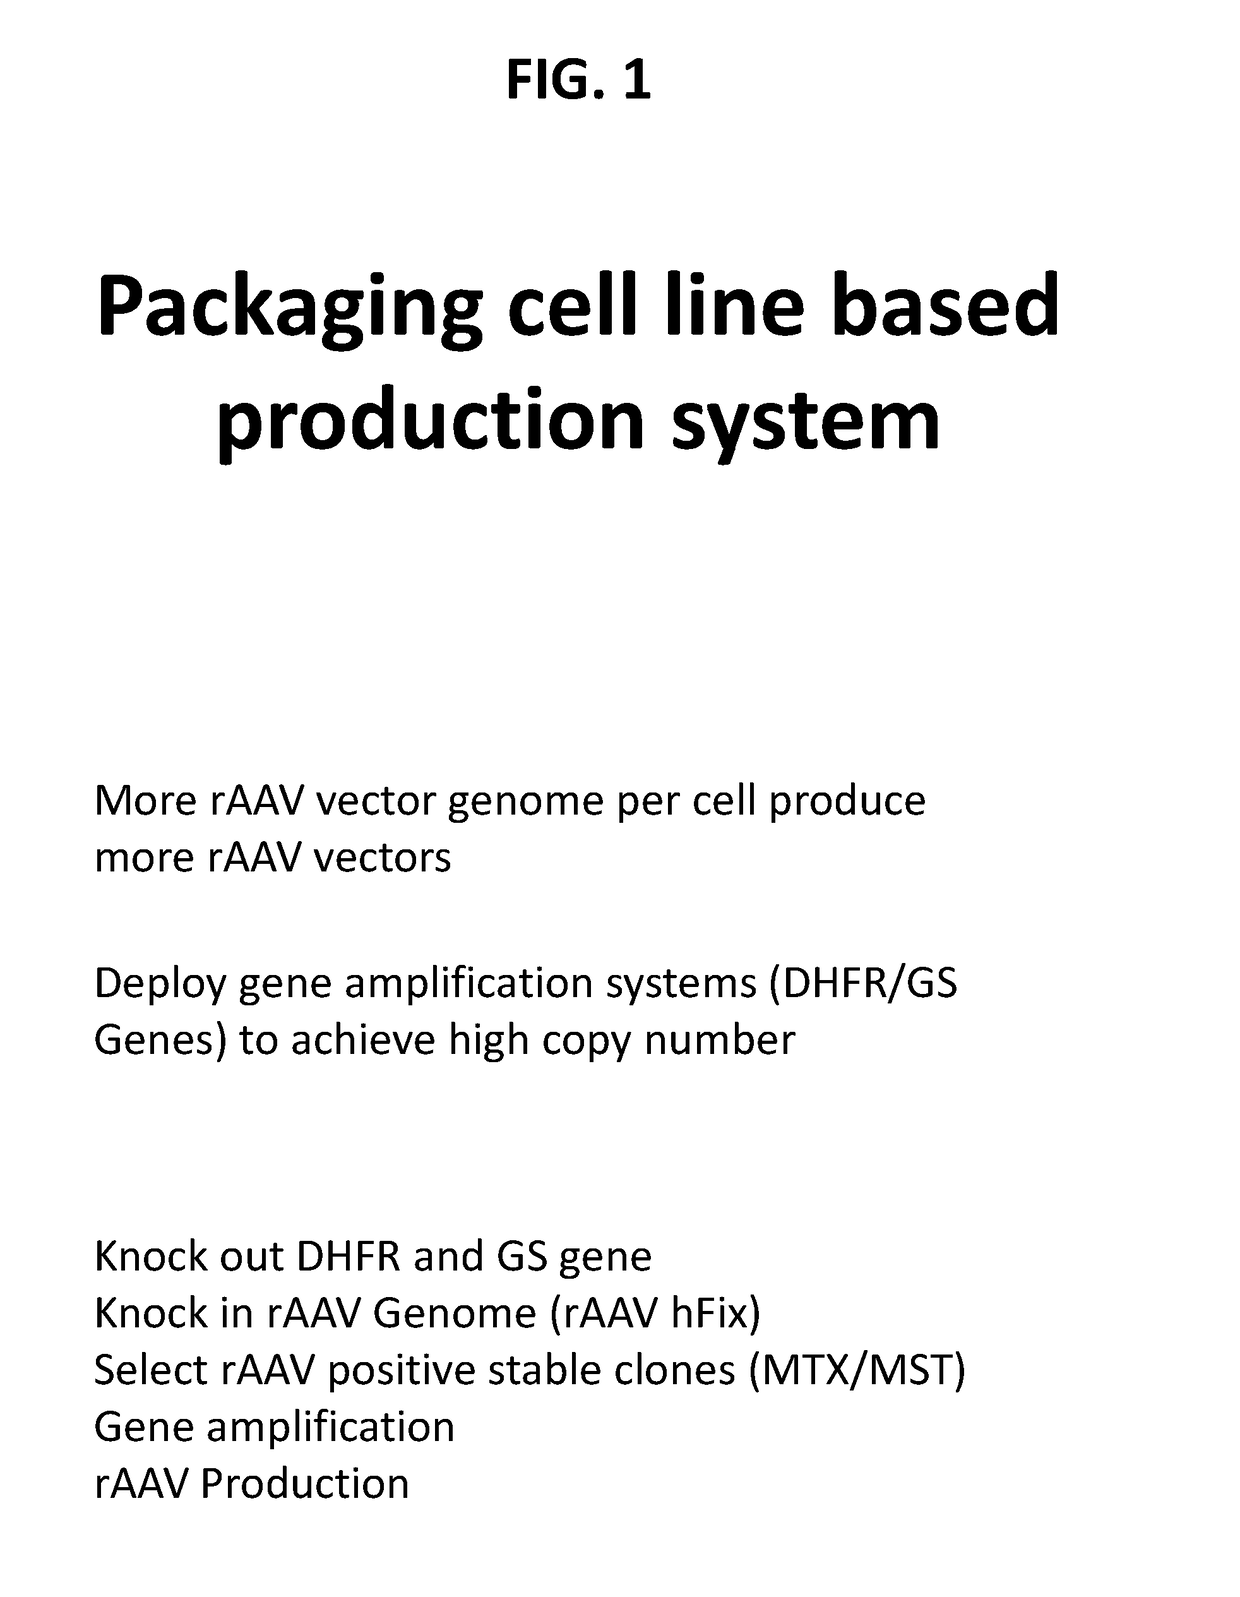 Cell line for recombinant protein and/or viral vector production